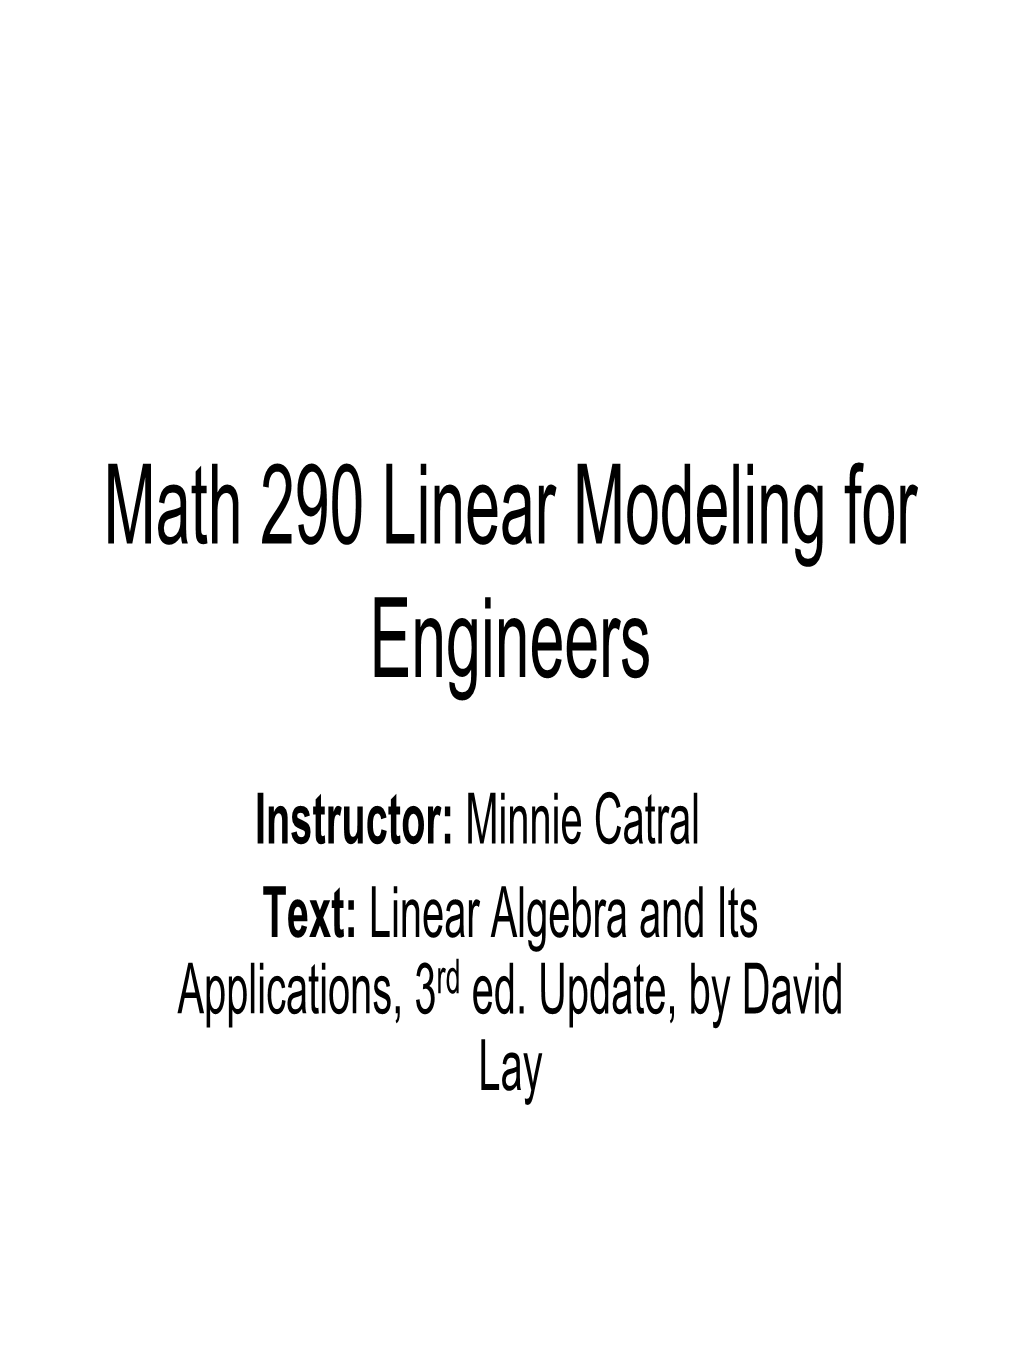 Math 290 Linear Modeling for Engineers